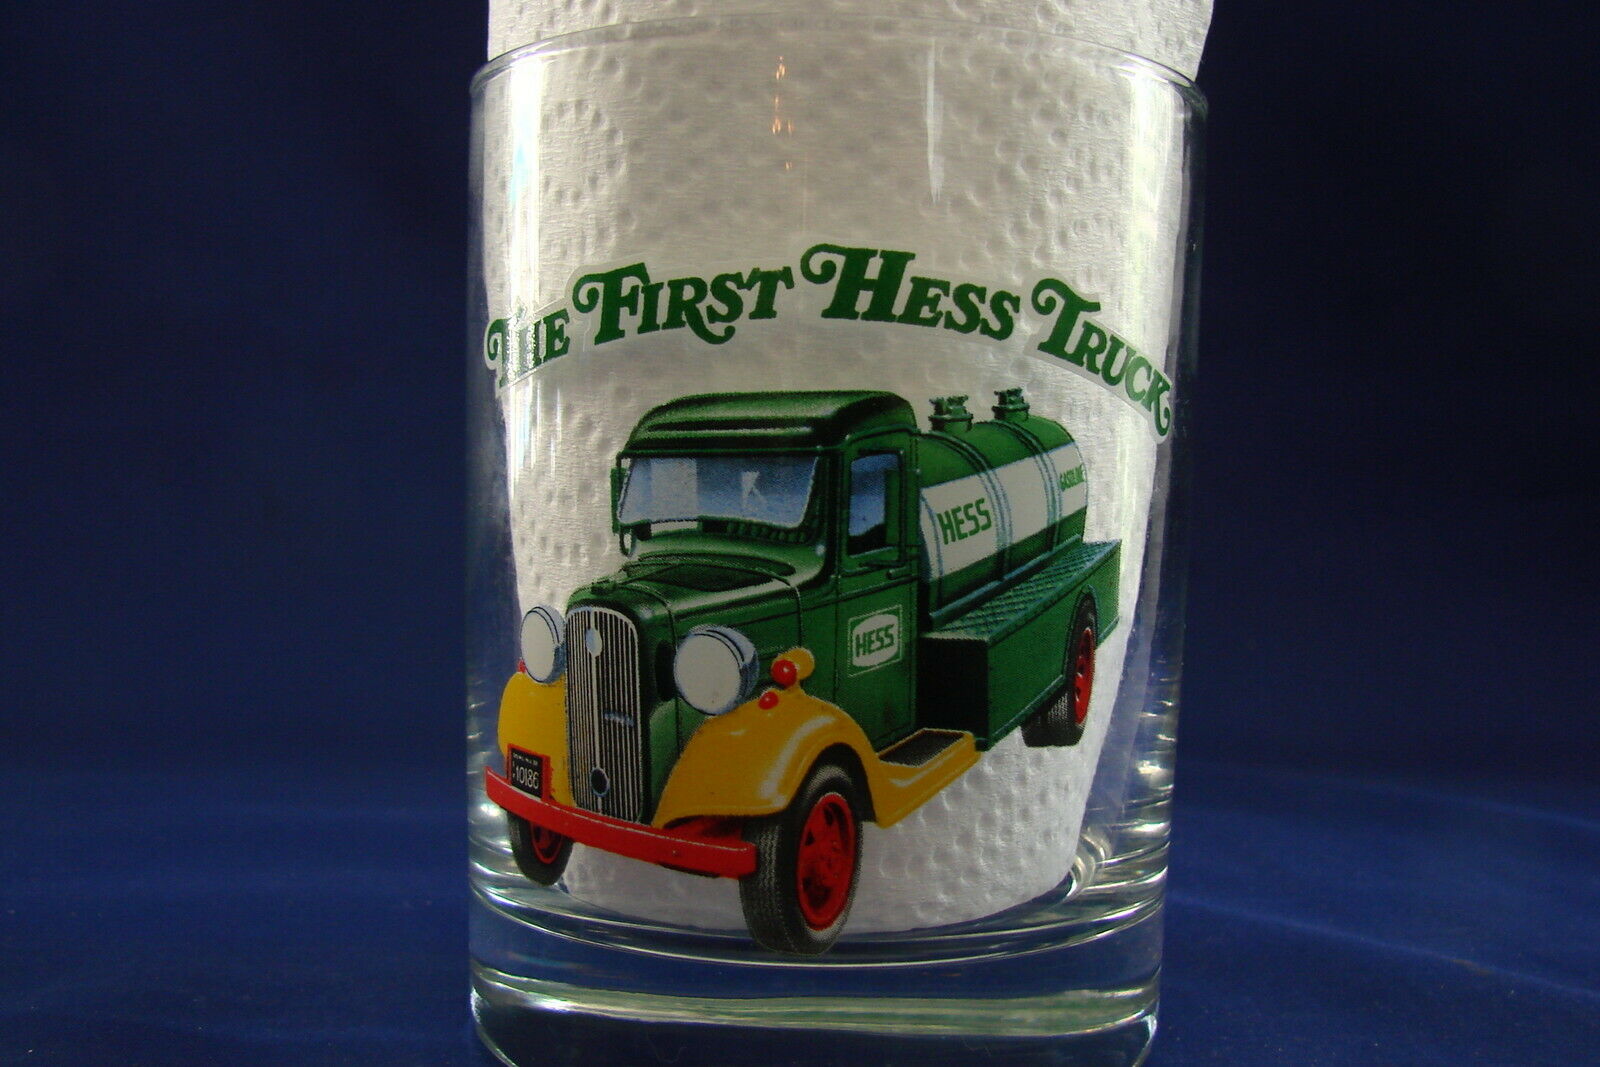 Hess 1996 Collectable Drinking Glass Bar Ware 1982 The First Hess Truck